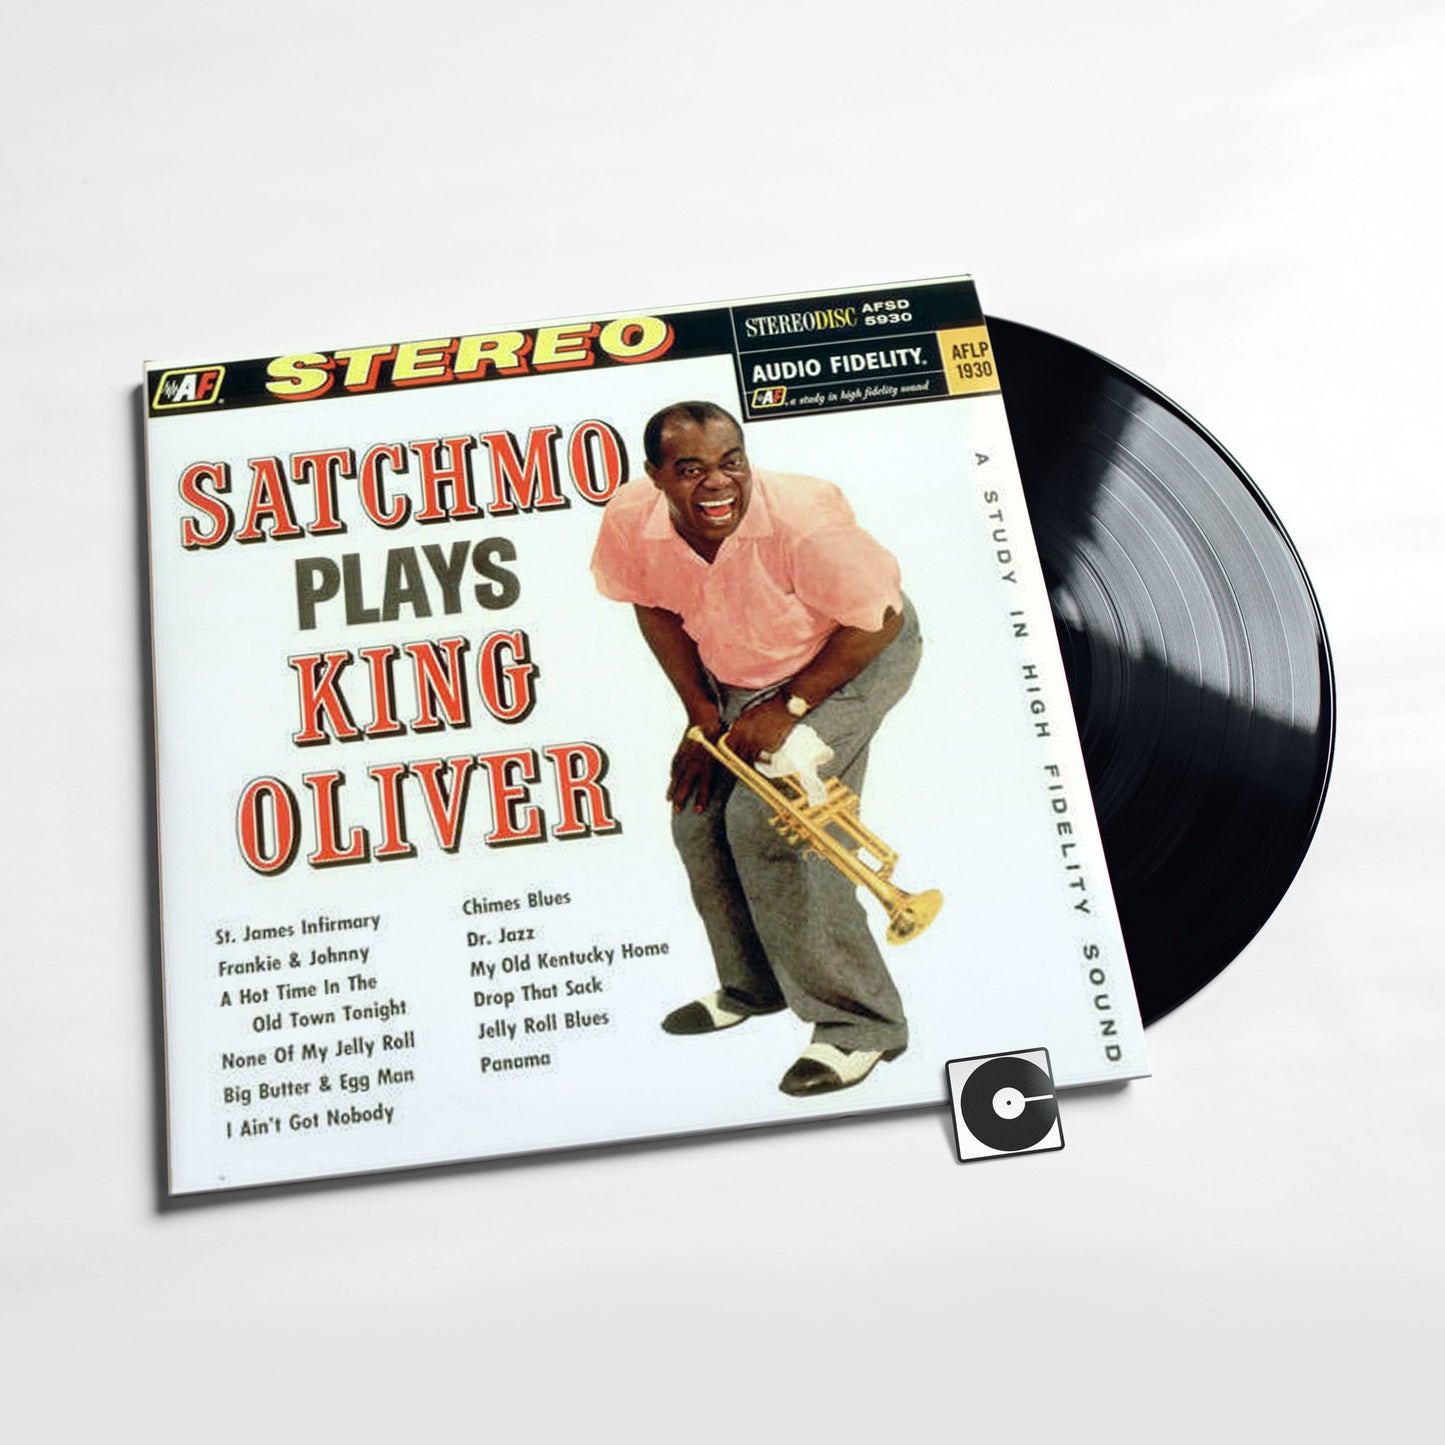 Louis Armstrong - "Satchmo Plays King Oliver" Analogue Productions